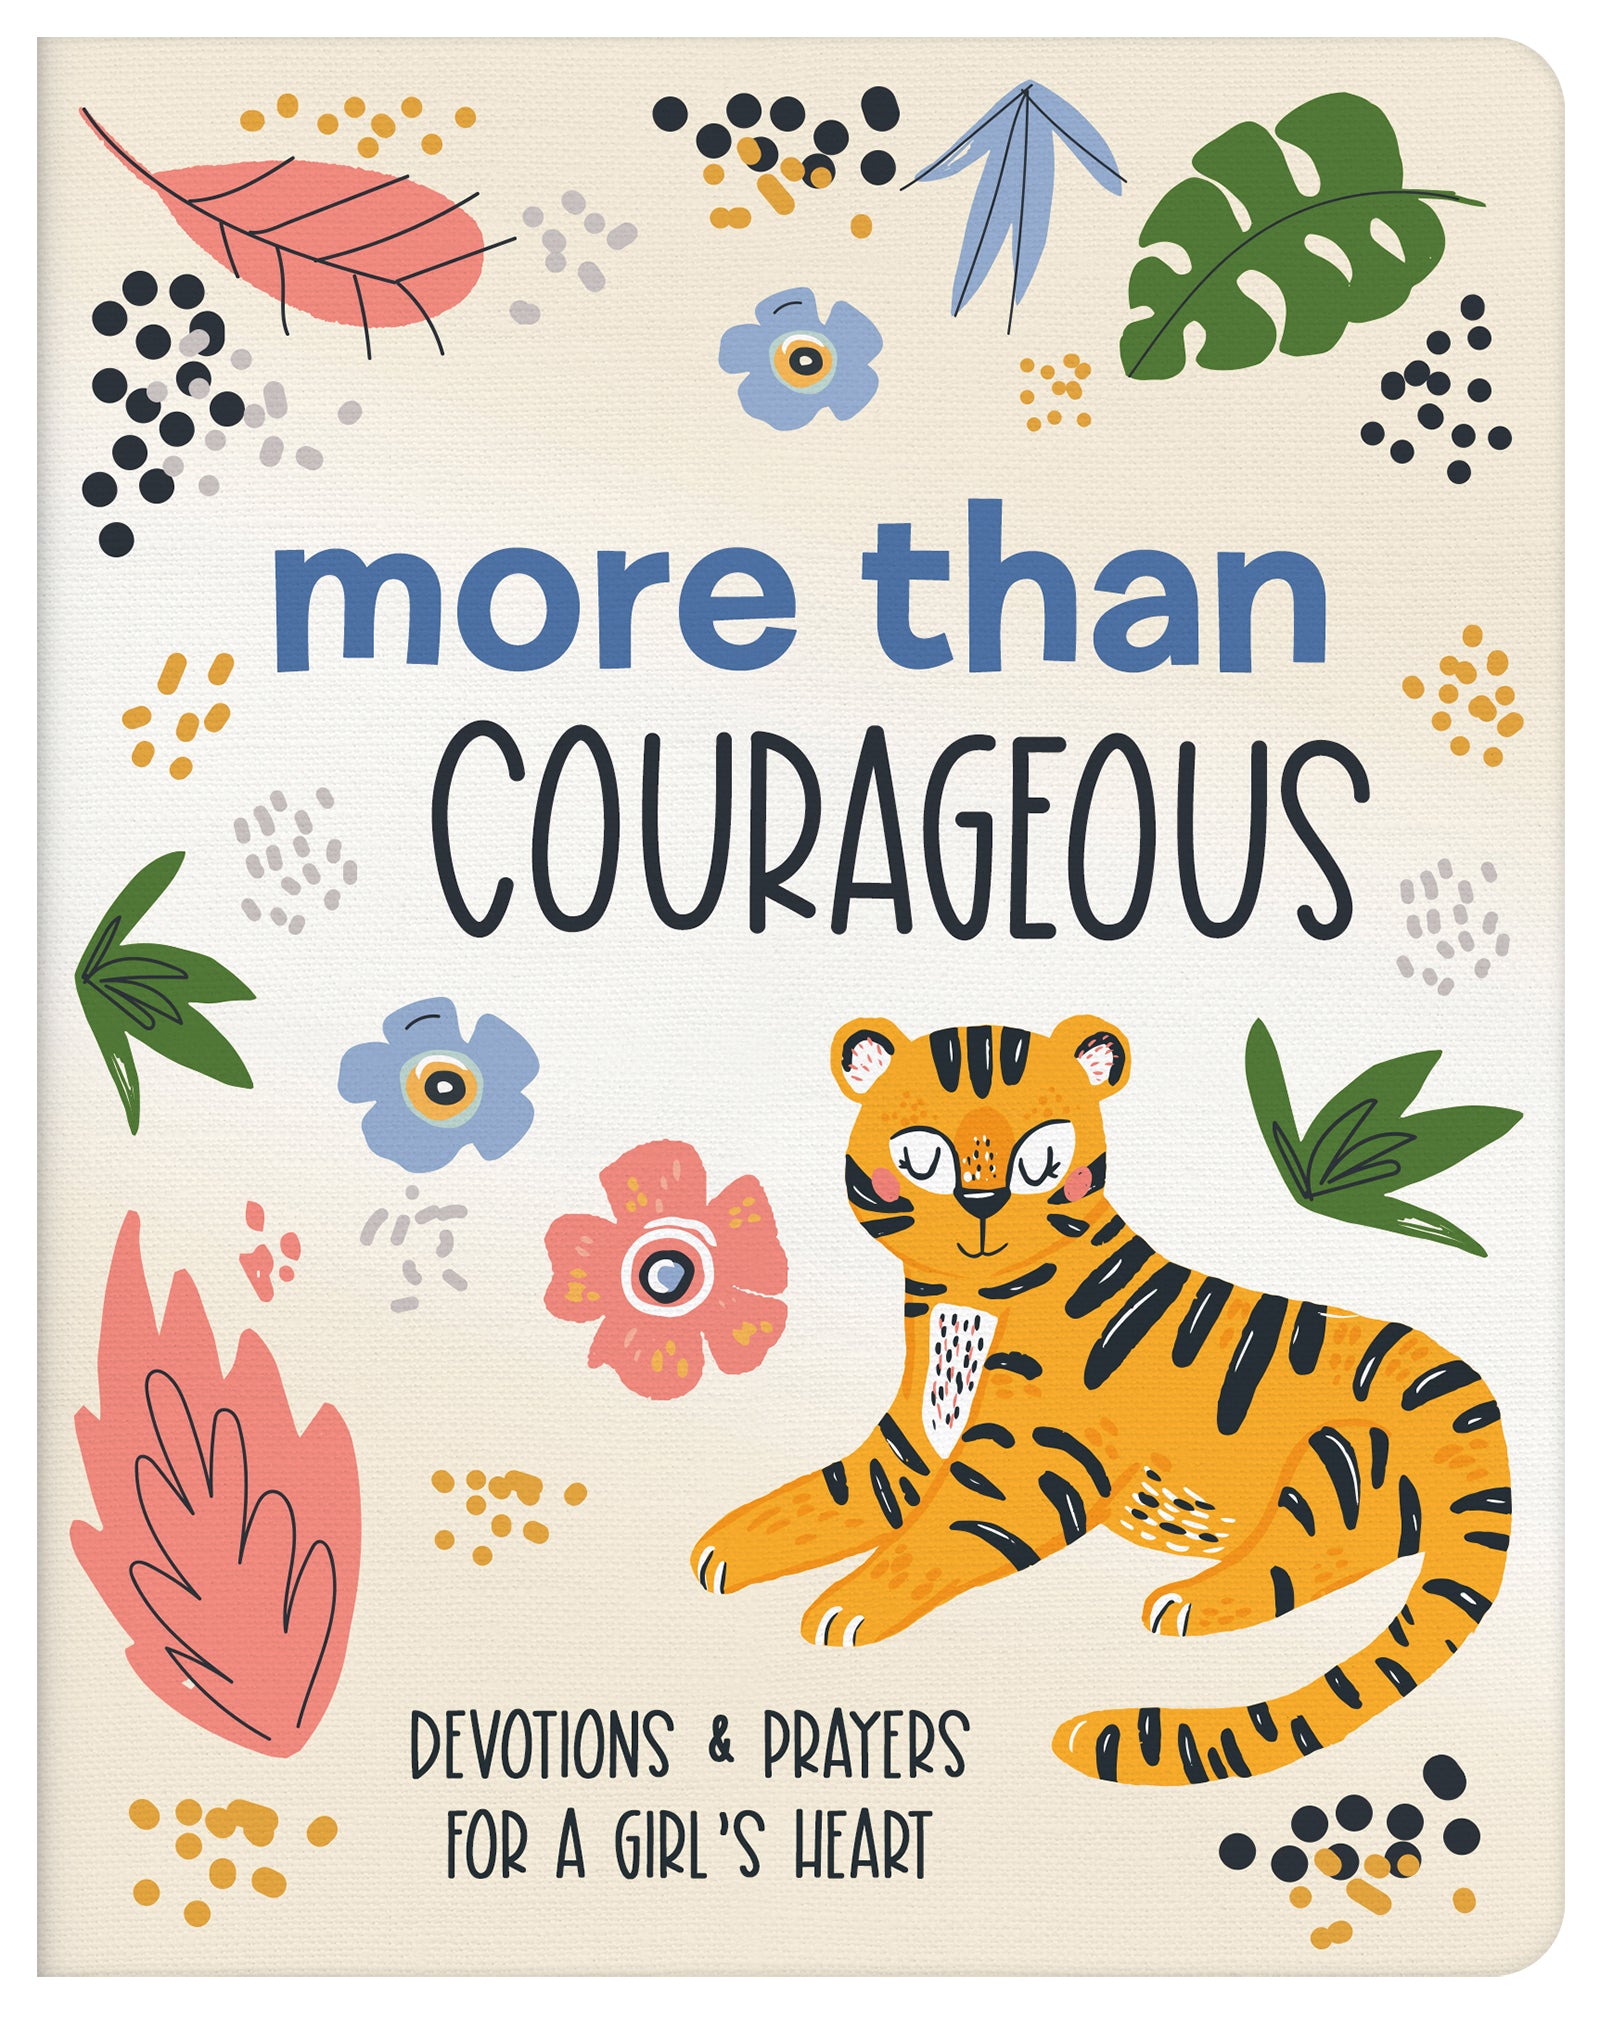 More Than Courageous - The Christian Gift Company